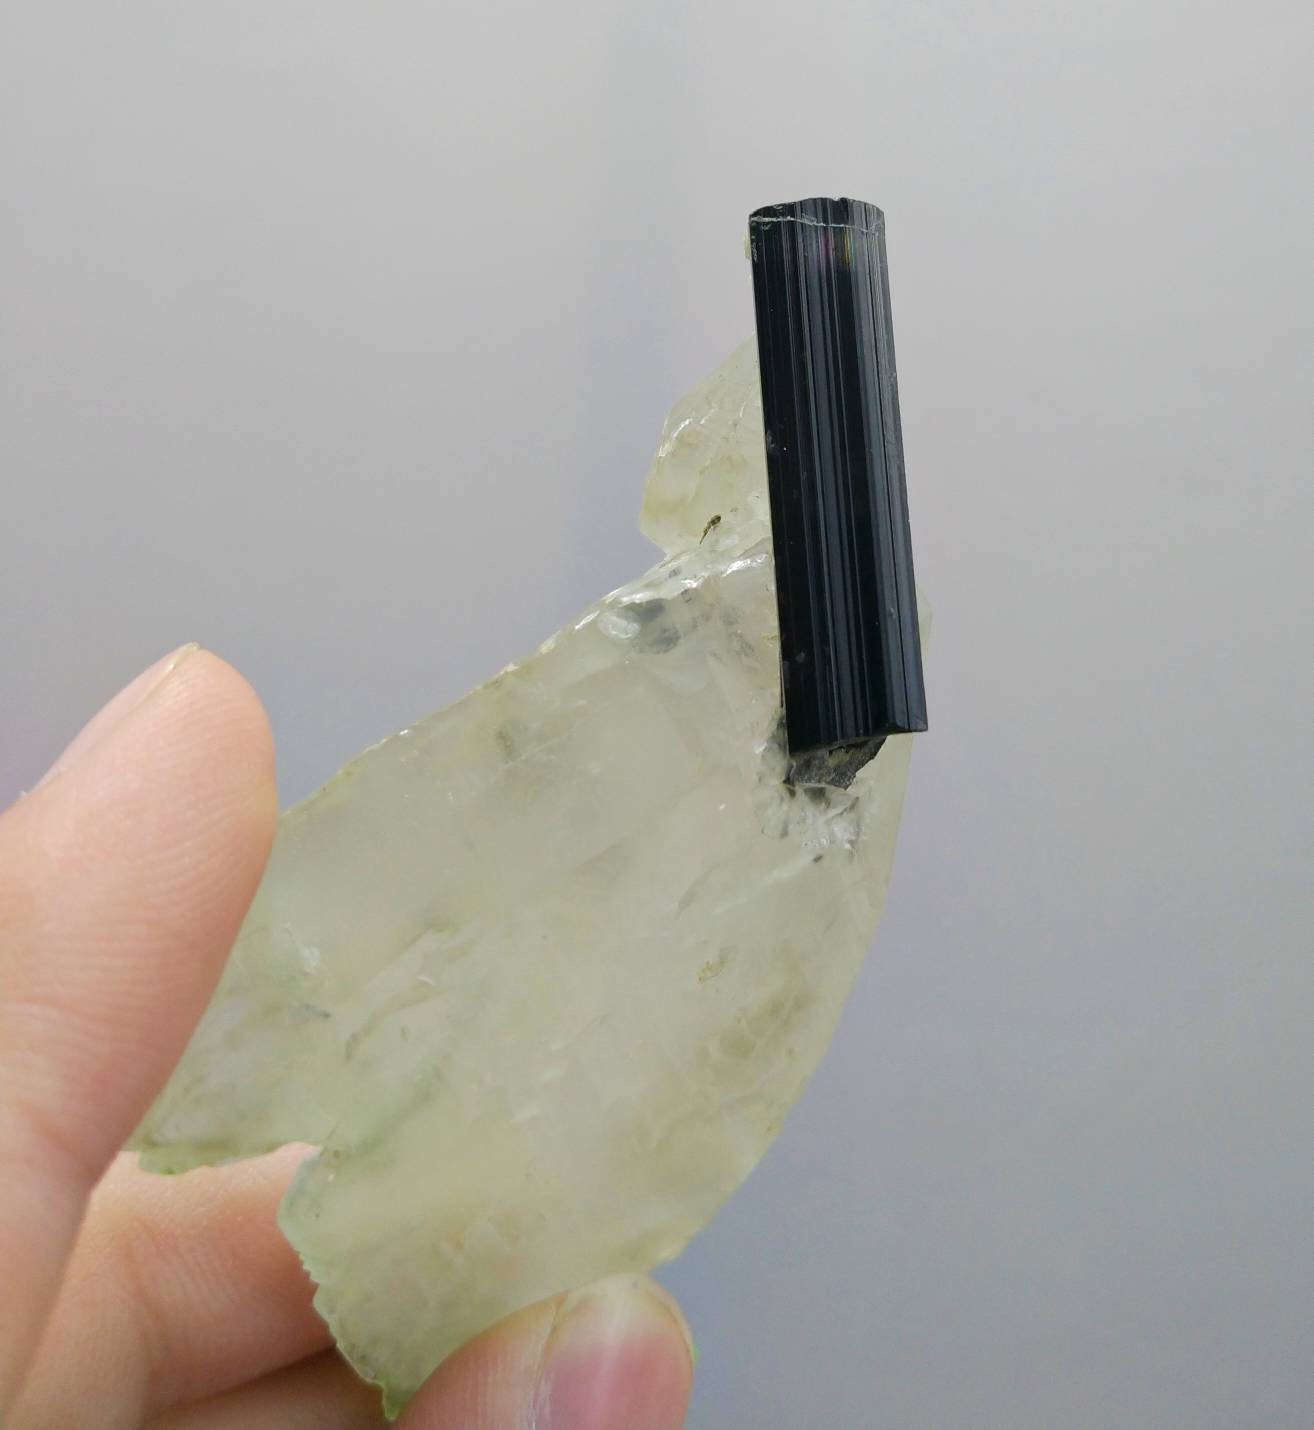 ARSAA GEMS AND MINERALSNatural fine quality terminated on matrix black tourmaline with quartz crystal from Pakistan, weight 45.2 grams - Premium  from ARSAA GEMS AND MINERALS - Just $45.00! Shop now at ARSAA GEMS AND MINERALS